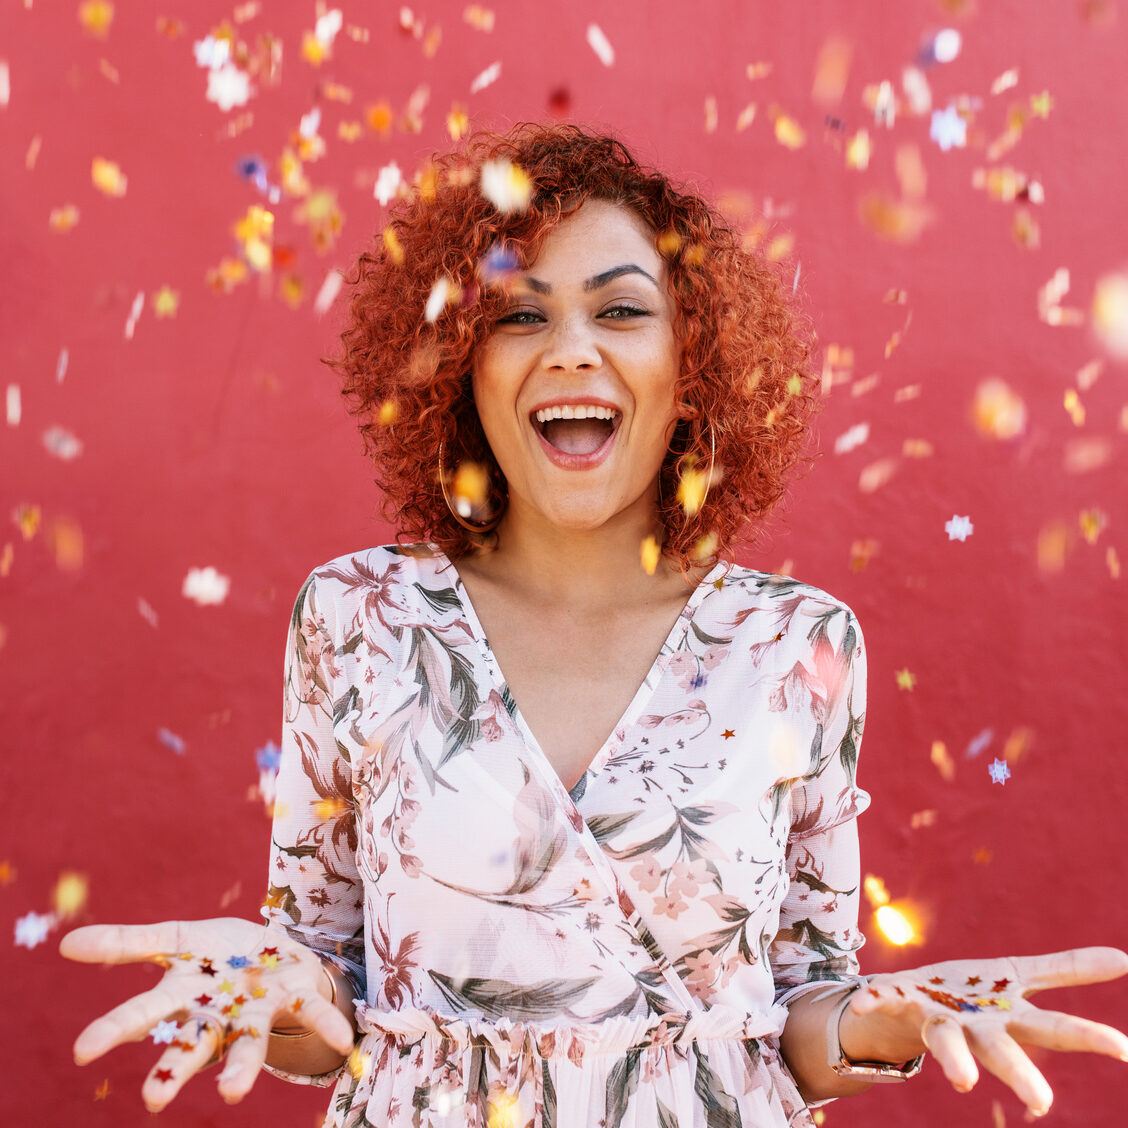 Young woman throwing star shaped colorful confetti in air. Close up of woman in happy mood with confetti all around against a red background.